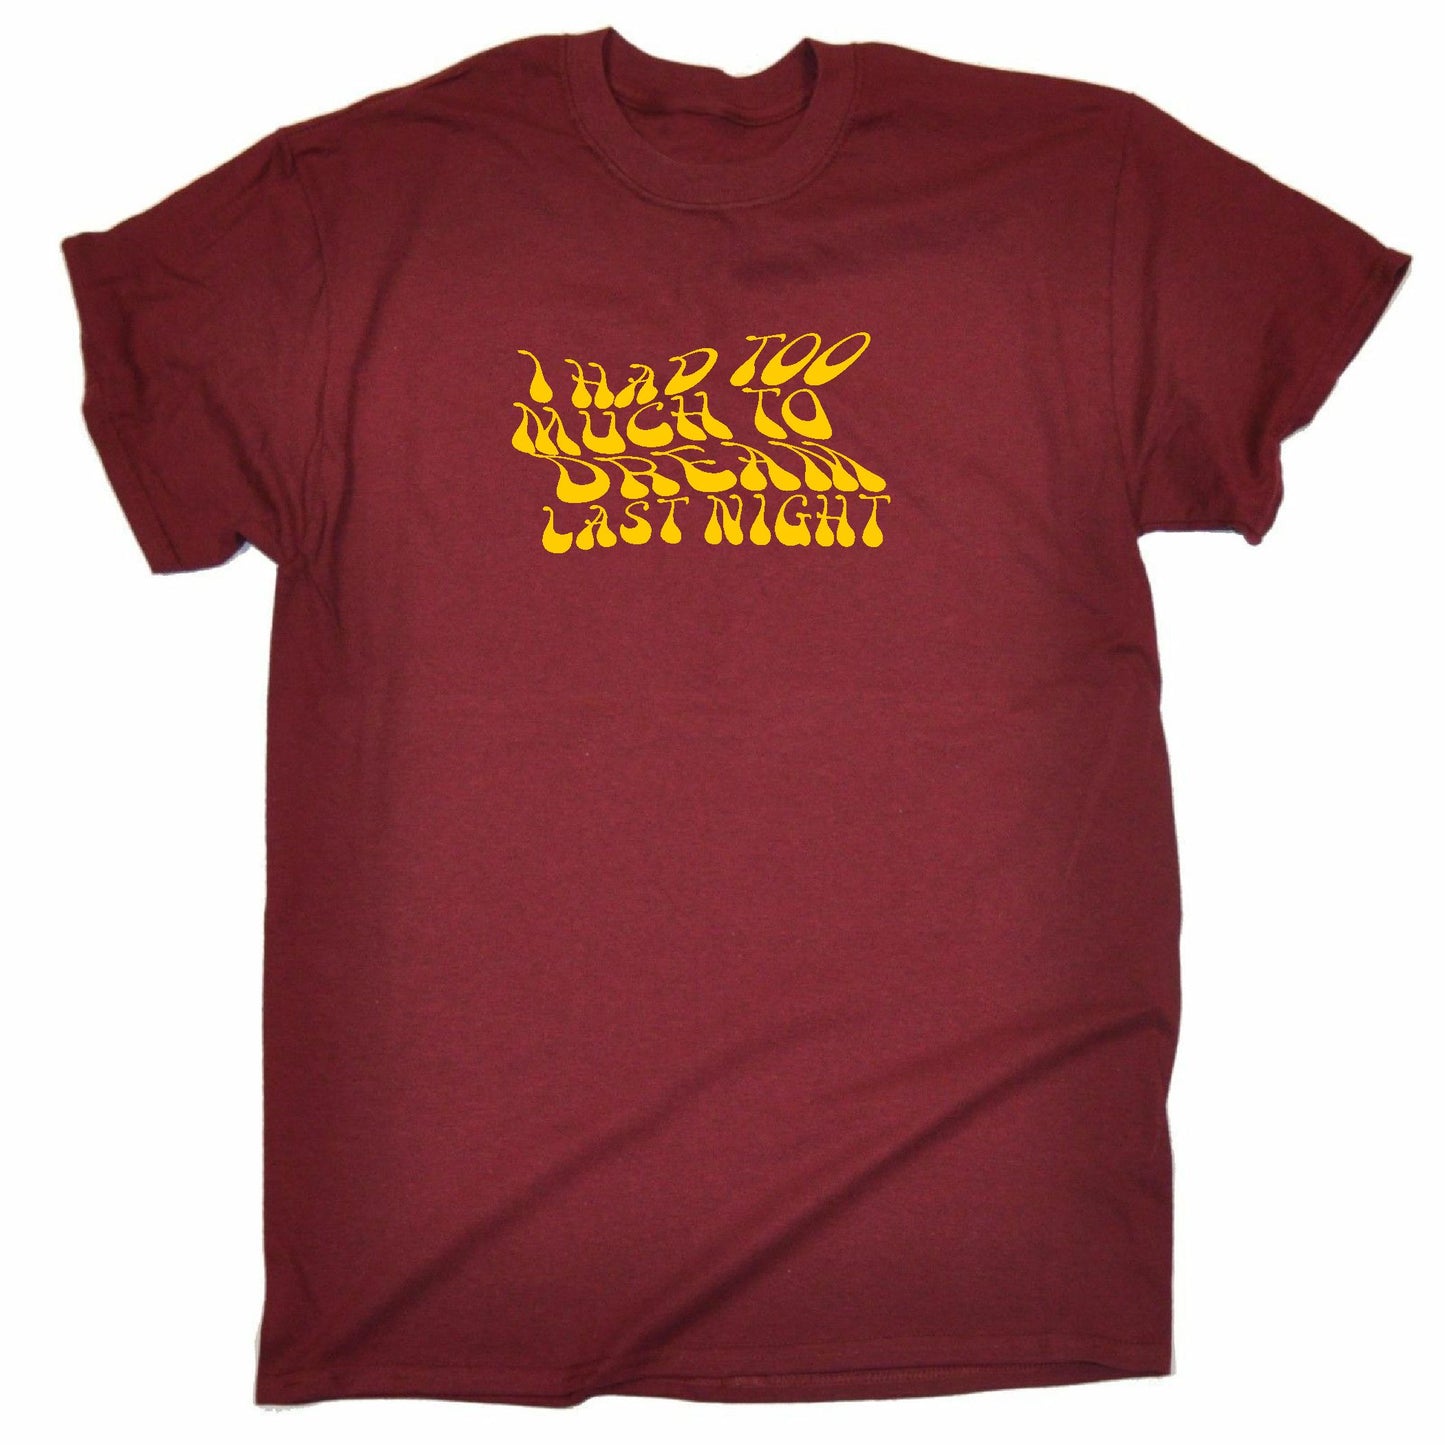 'I Had Too Much To Dream Last Night' T-Shirt - Retro 60s Psychedelic, Various Colours